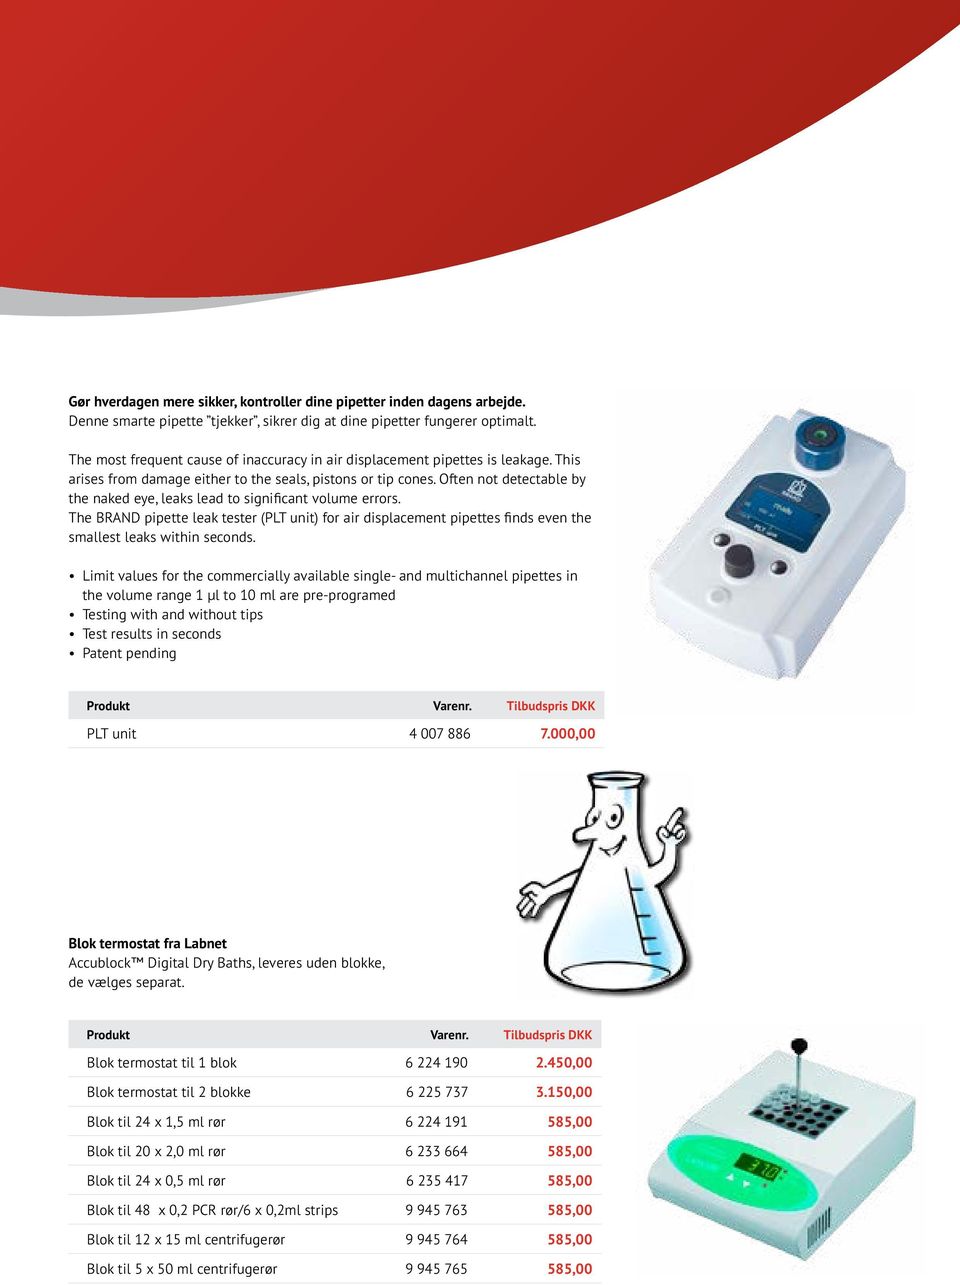 Often not detectable by the naked eye, leaks lead to significant volume errors. The BRAND pipette leak tester (PLT unit) for air displacement pipettes finds even the smallest leaks within seconds.